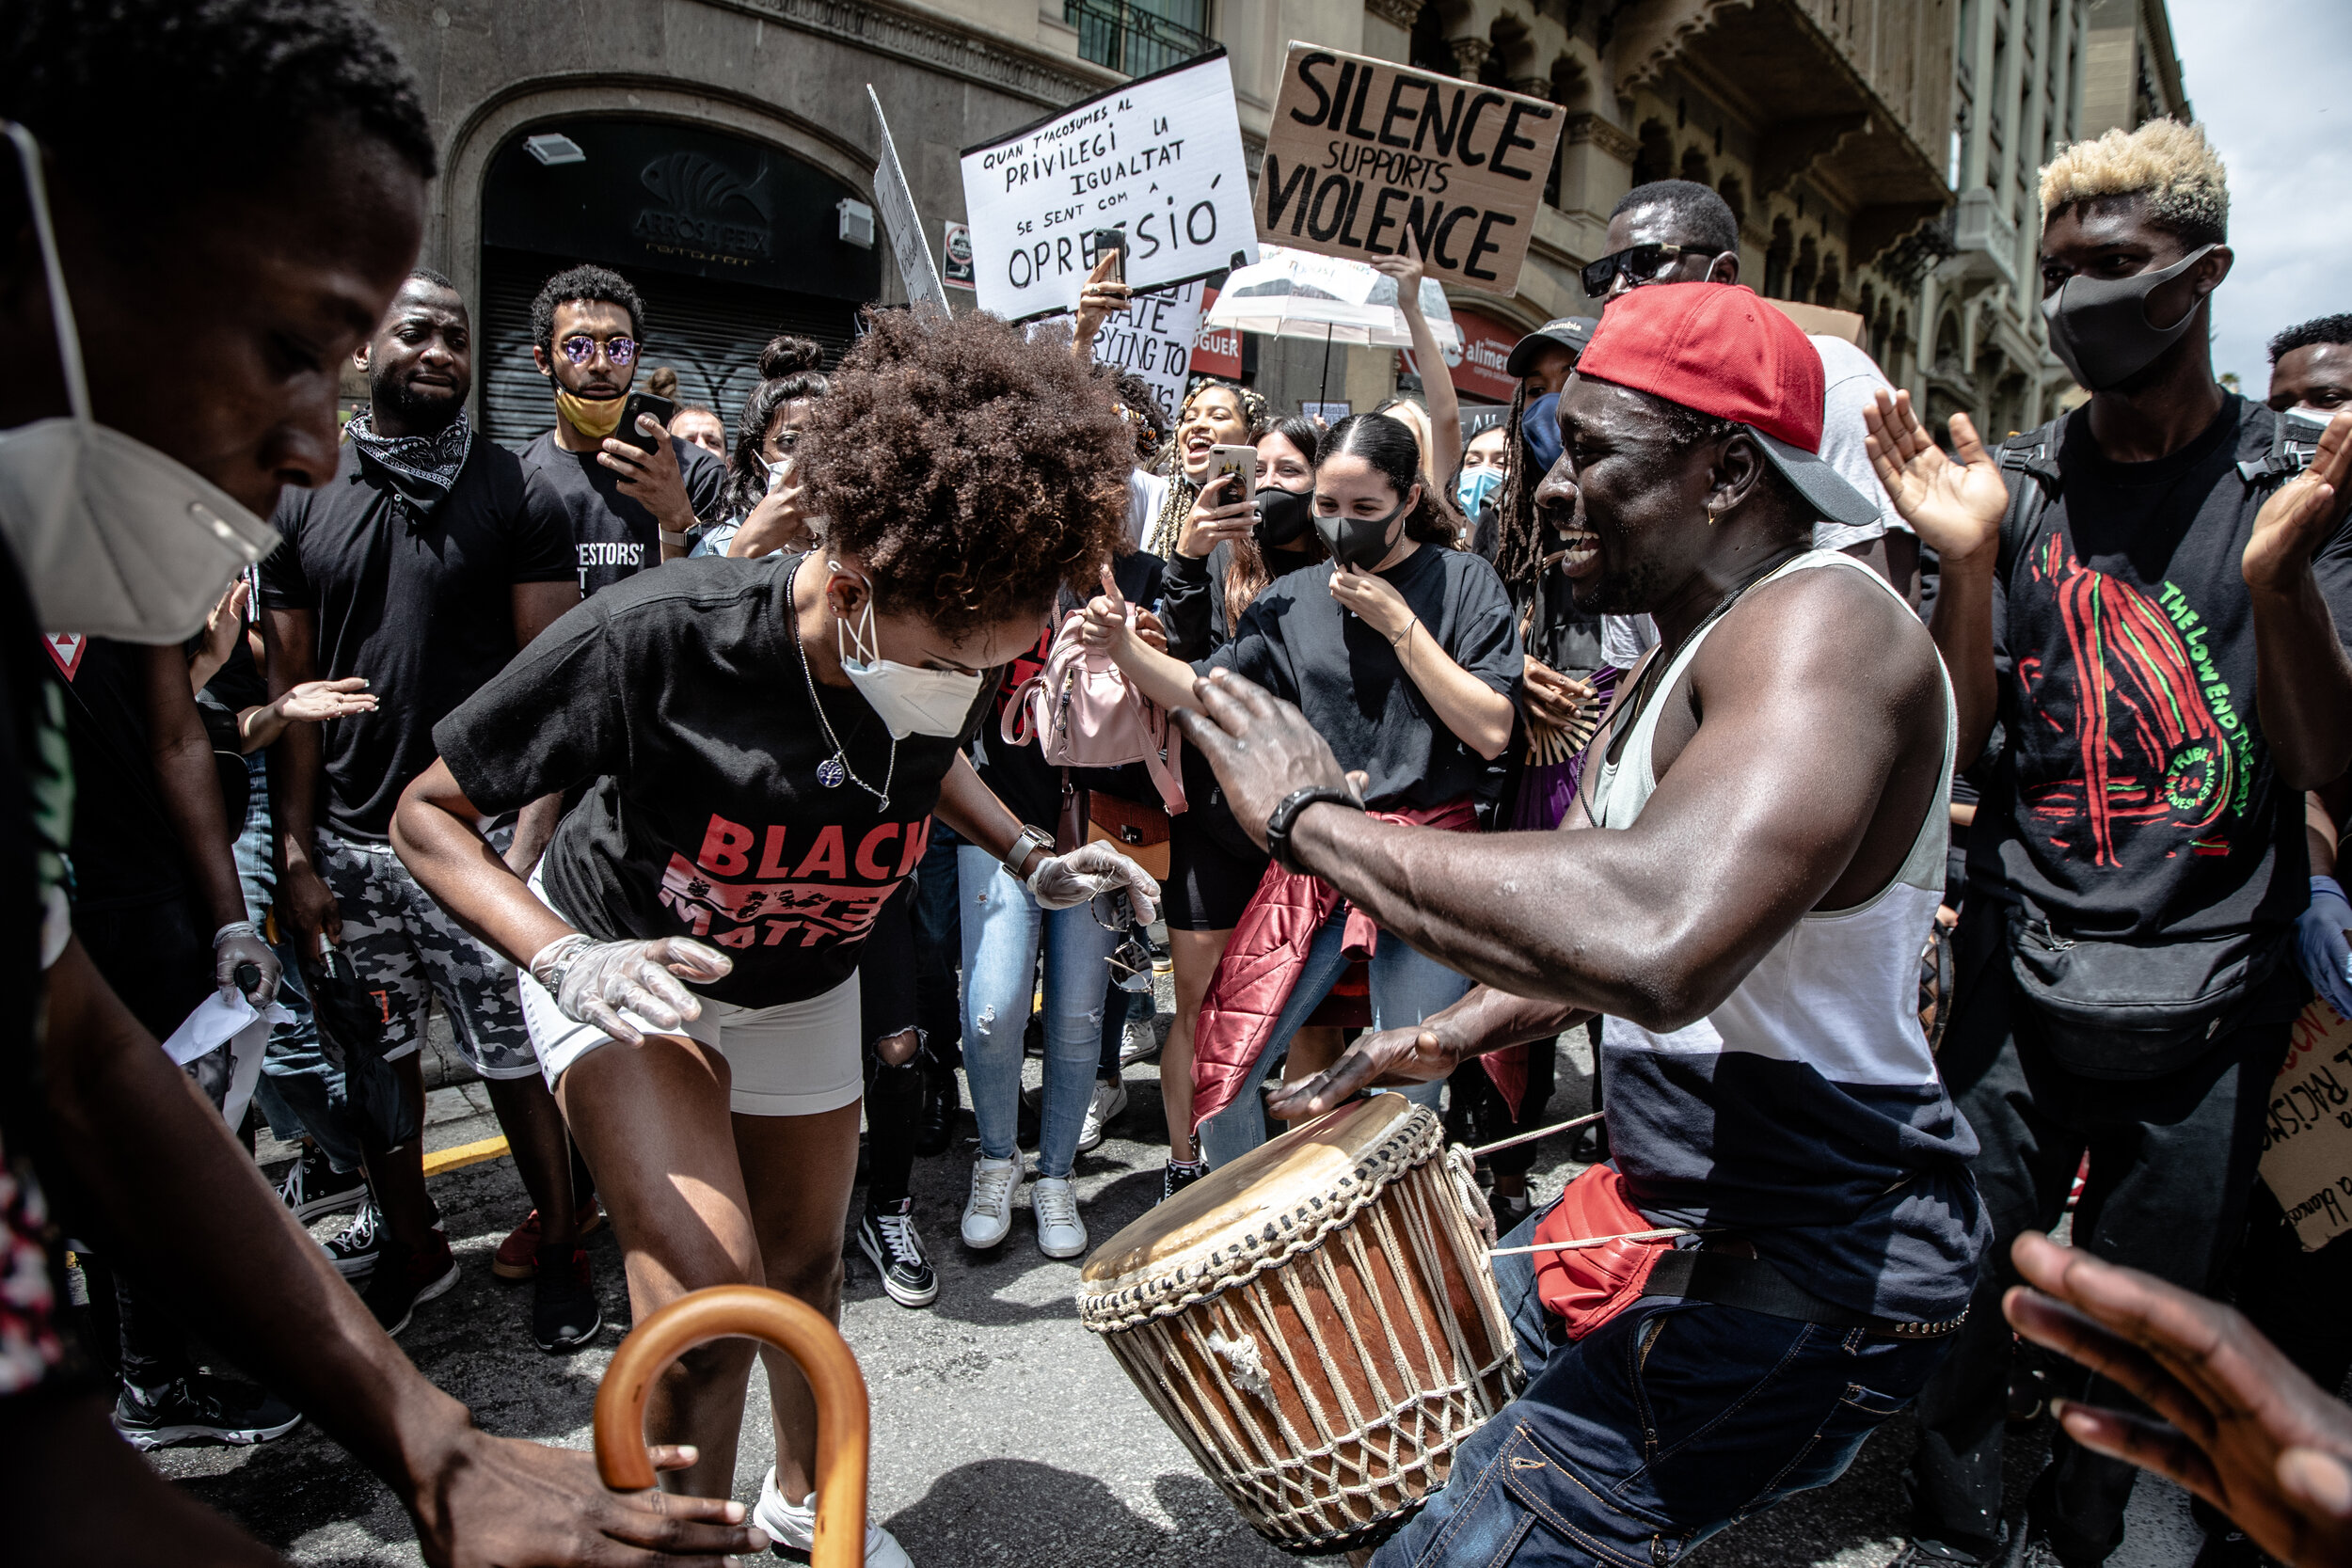  On June 7th, 2020, the Black African and Afro-descendant Community in Spain organized protests around 16 cities in response to the murder of George Floyd, and for all Black lives against racism. In Barcelona crowds marched the streets after the prot